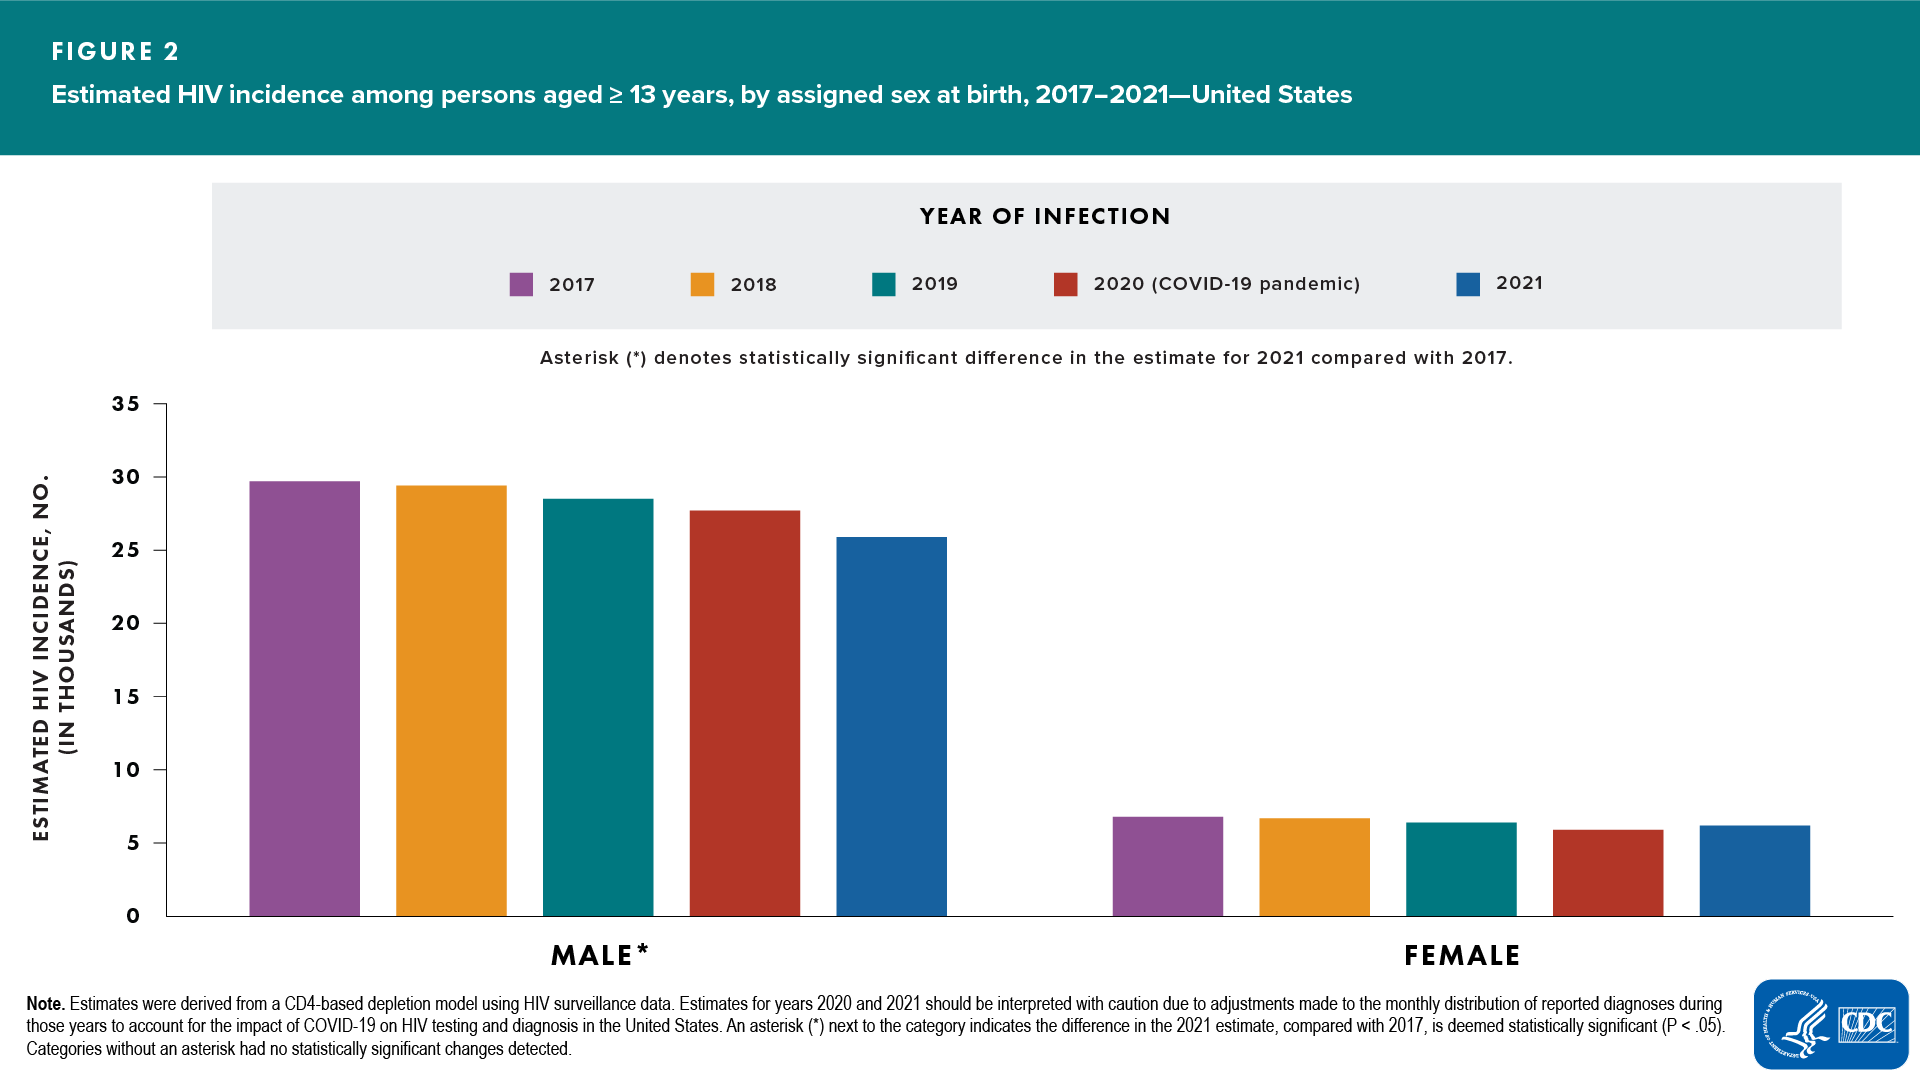 Figure 2. Estimated HIV incidence among persons aged ≥13 years, by assigned sex at birth, 2017–2021—United States